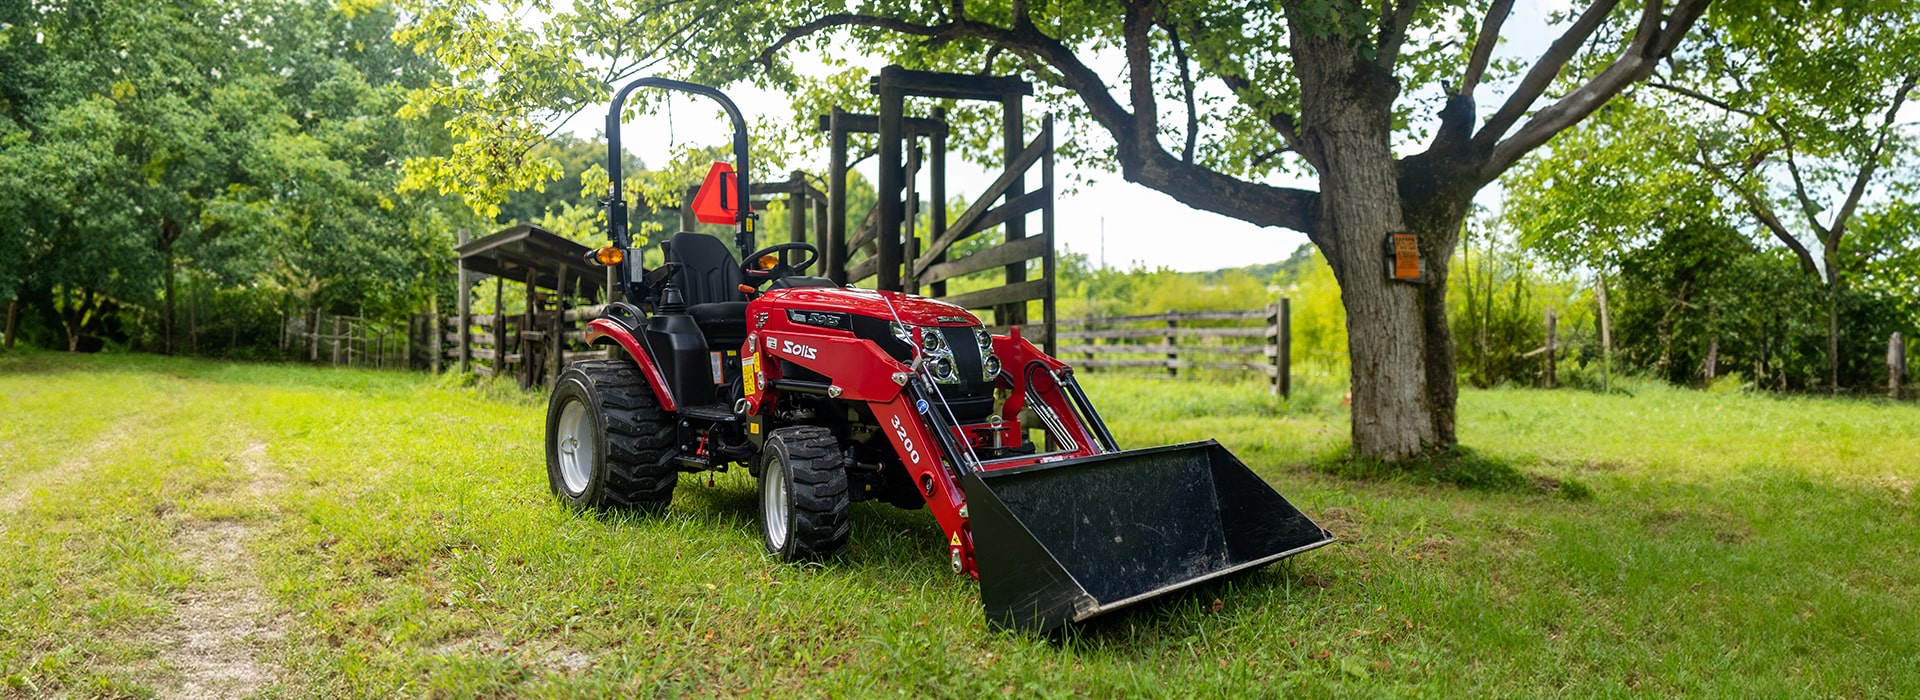 Compact Tractors Generally Have a Lower Upfront Cost Than Traditional Farm Tractors